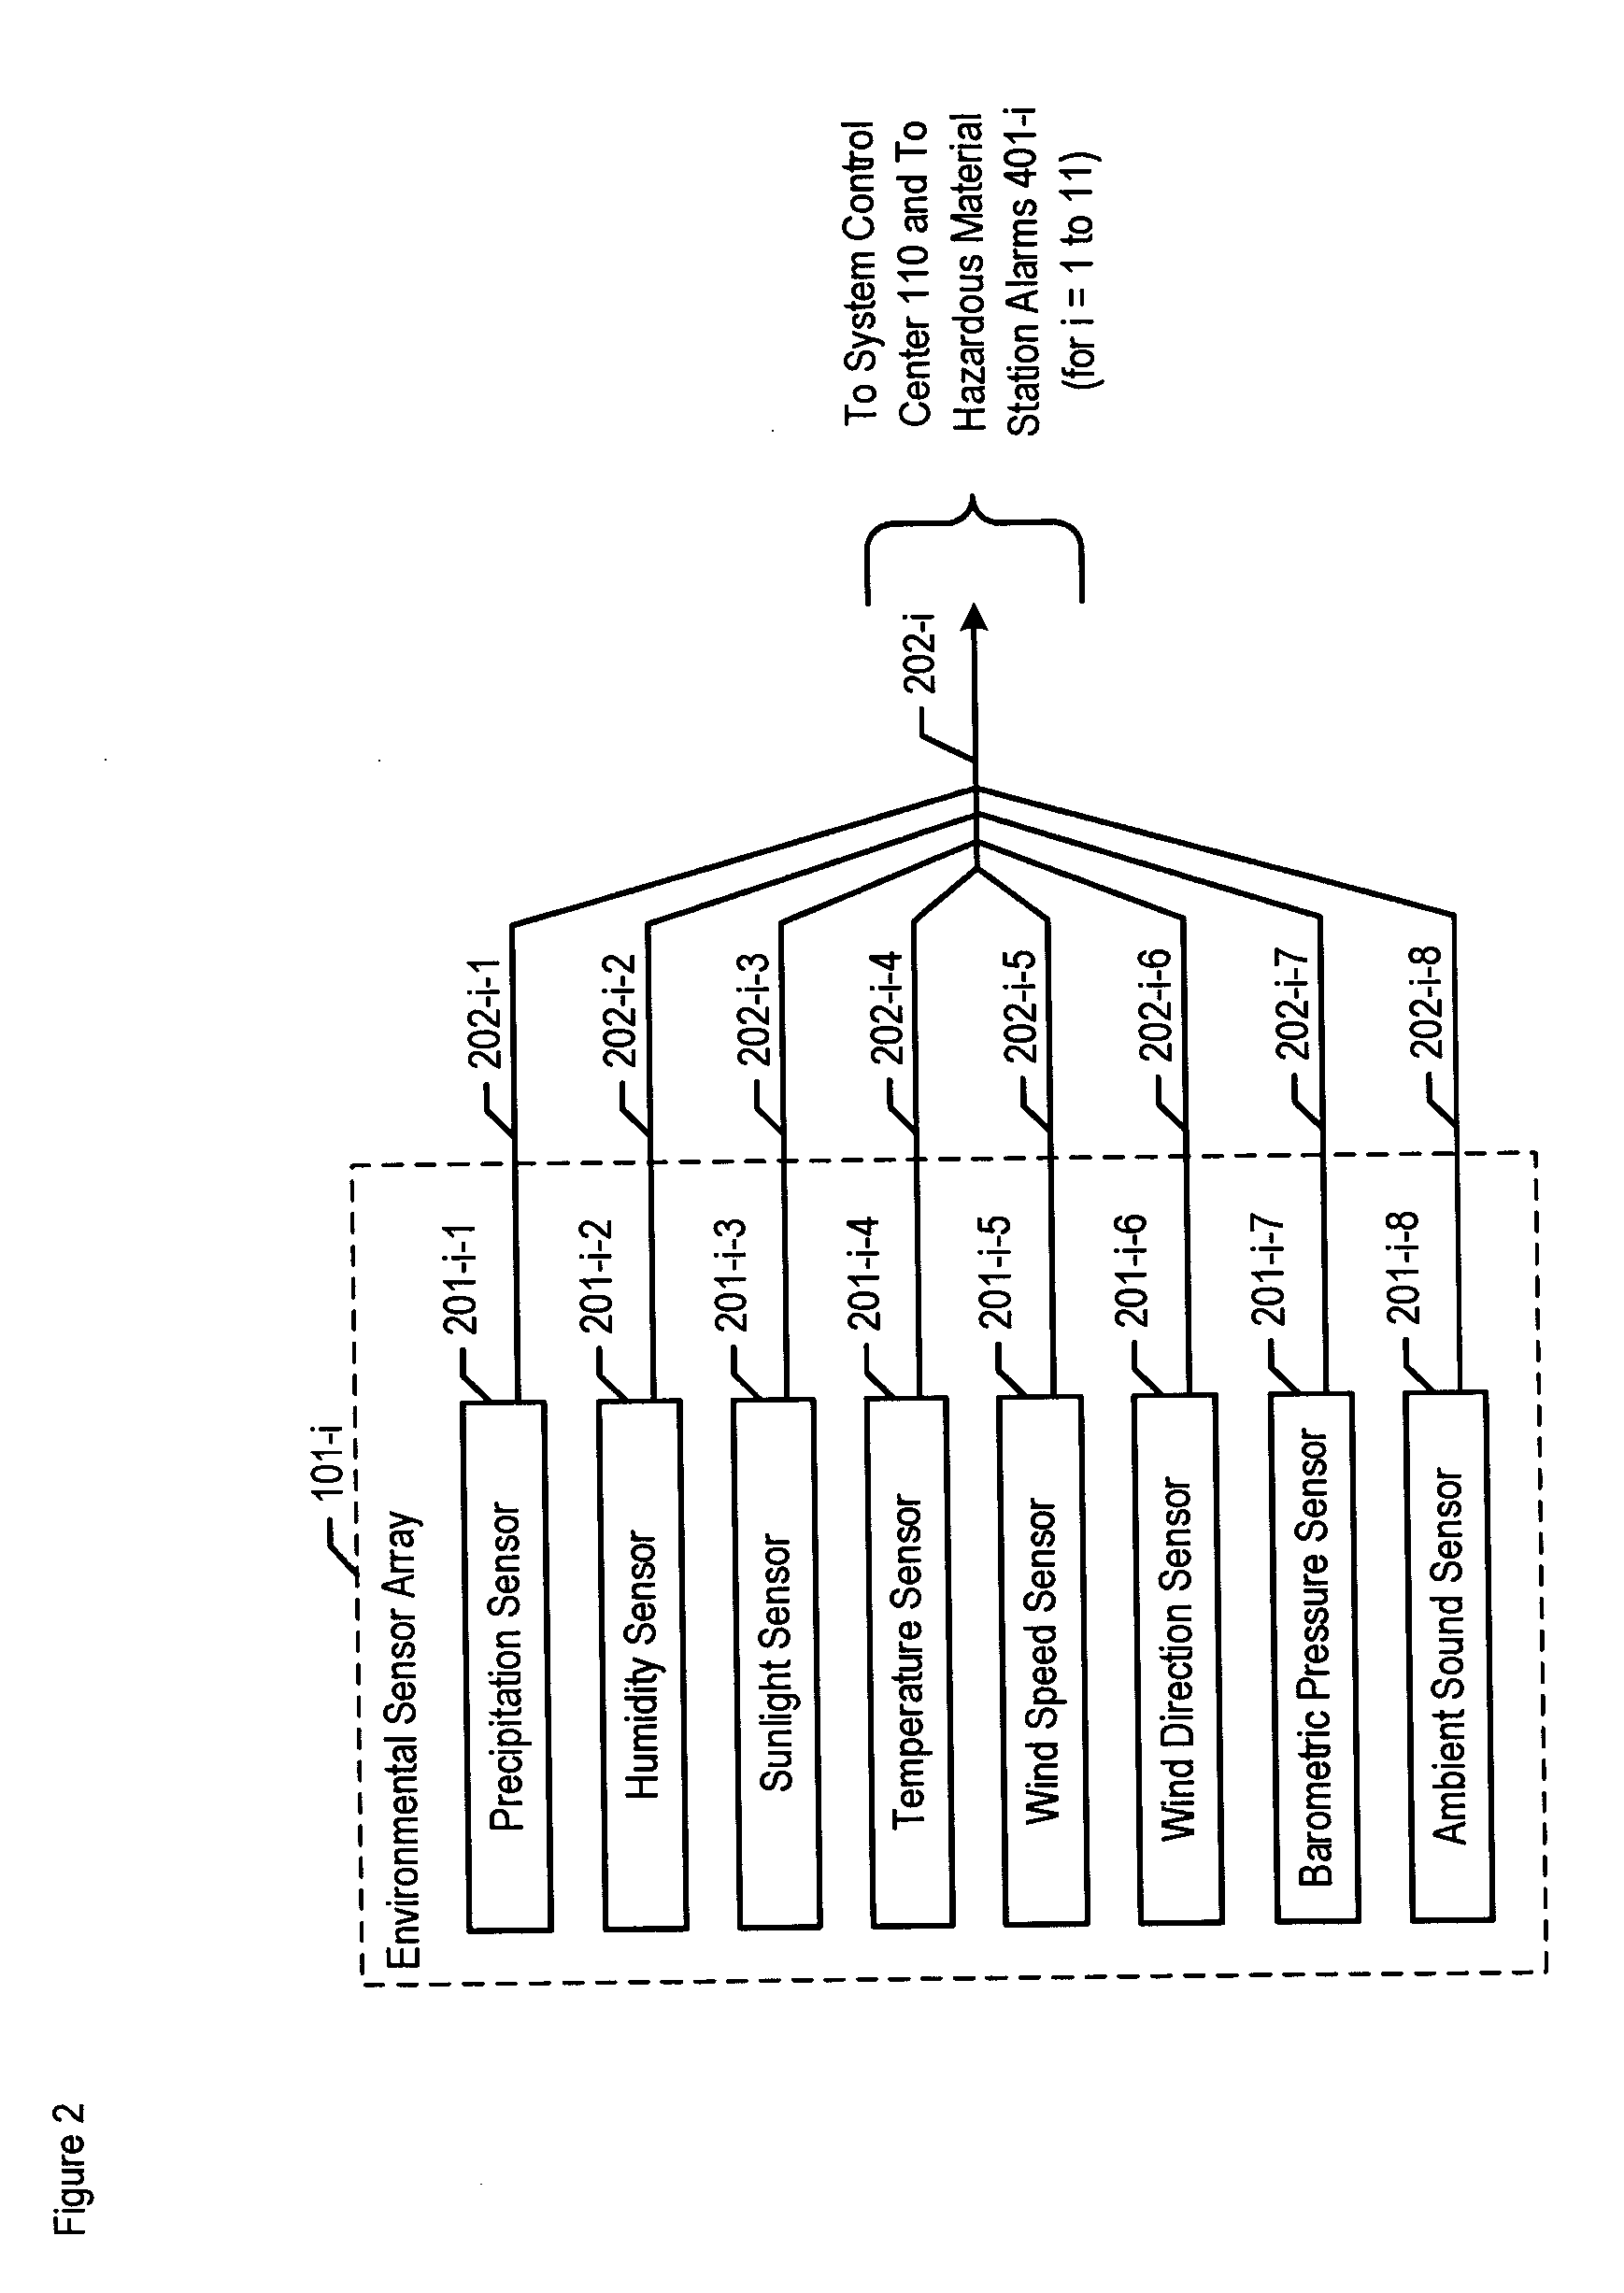 Chemical, biological, radiological, and nuclear weapon detection system with environmental acuity